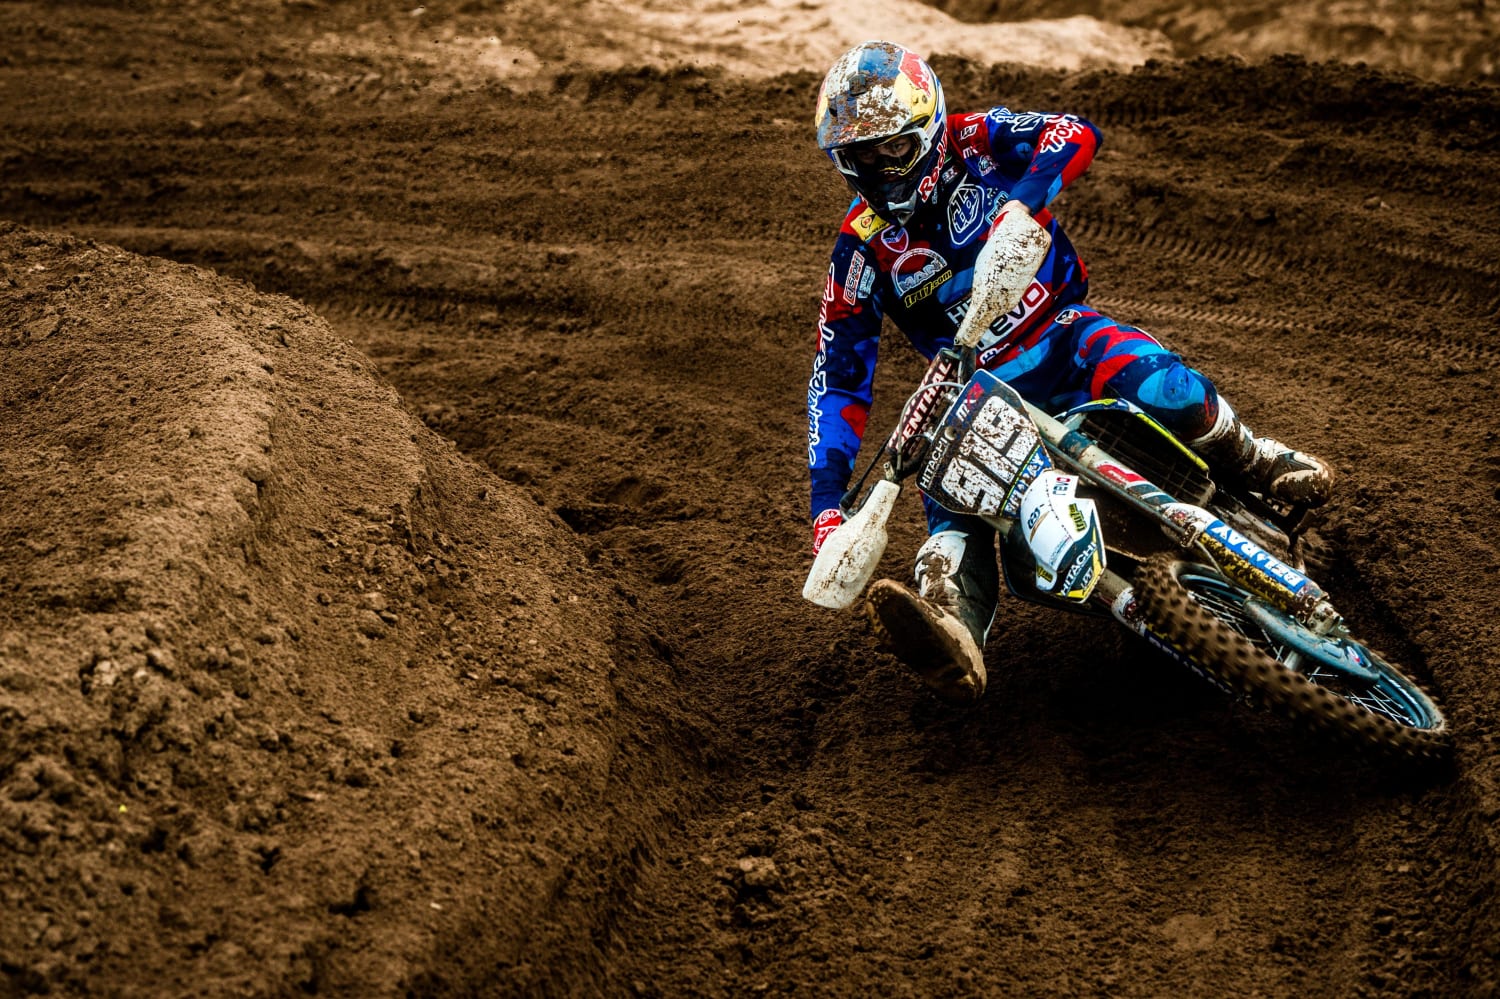 Everything you need to know about MX Bikes #mxbikes #dirtbike